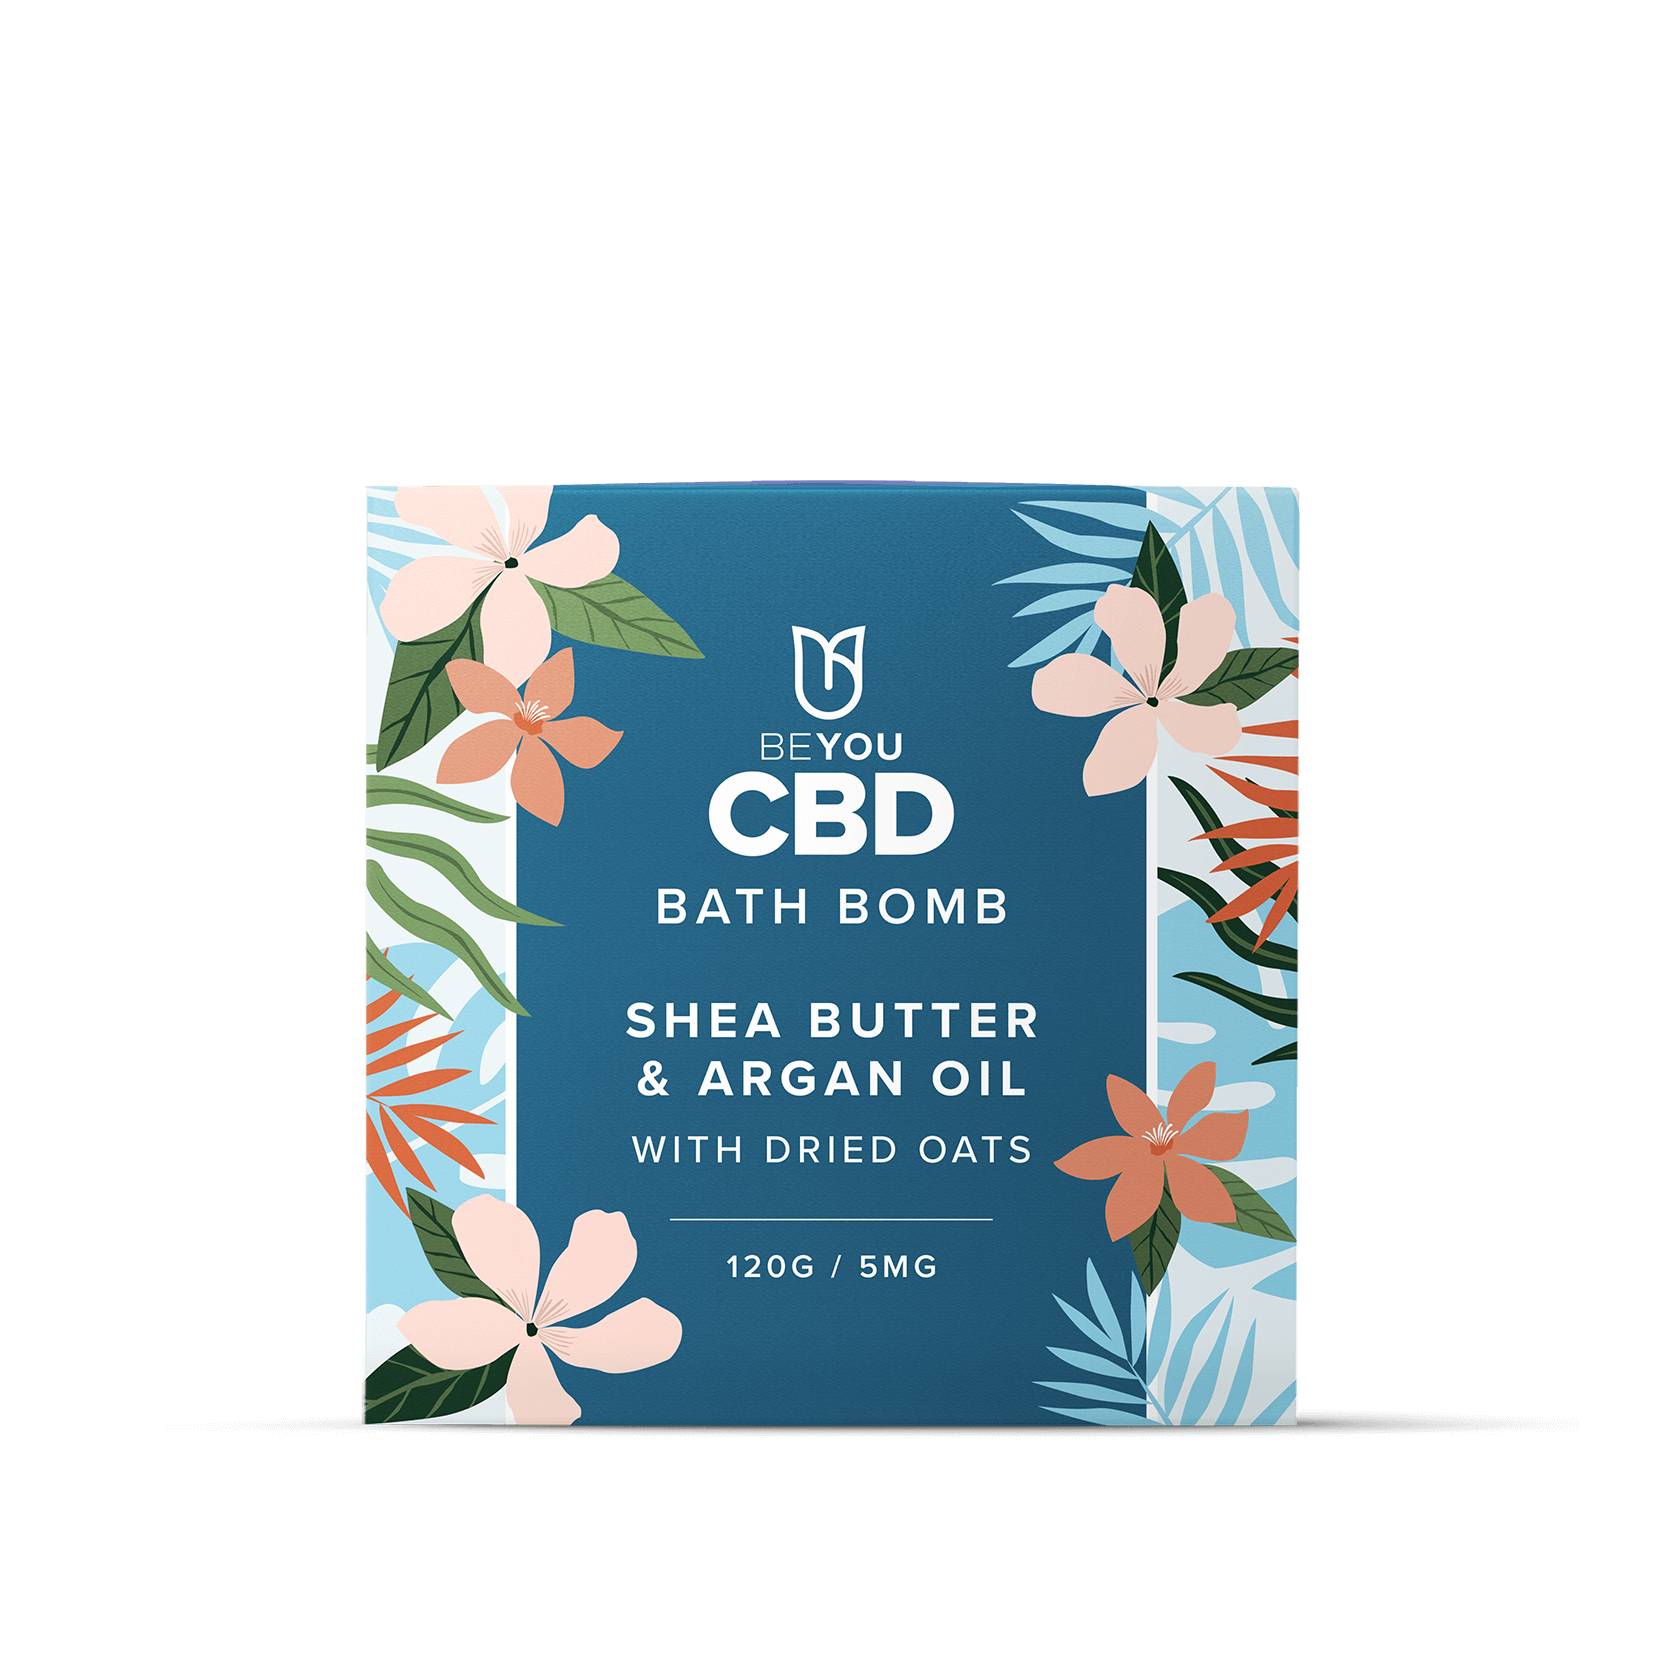 the best CBD bath bomb for skin featuring shea butter and argan essential oil with dried oats - think aveeno in a bath